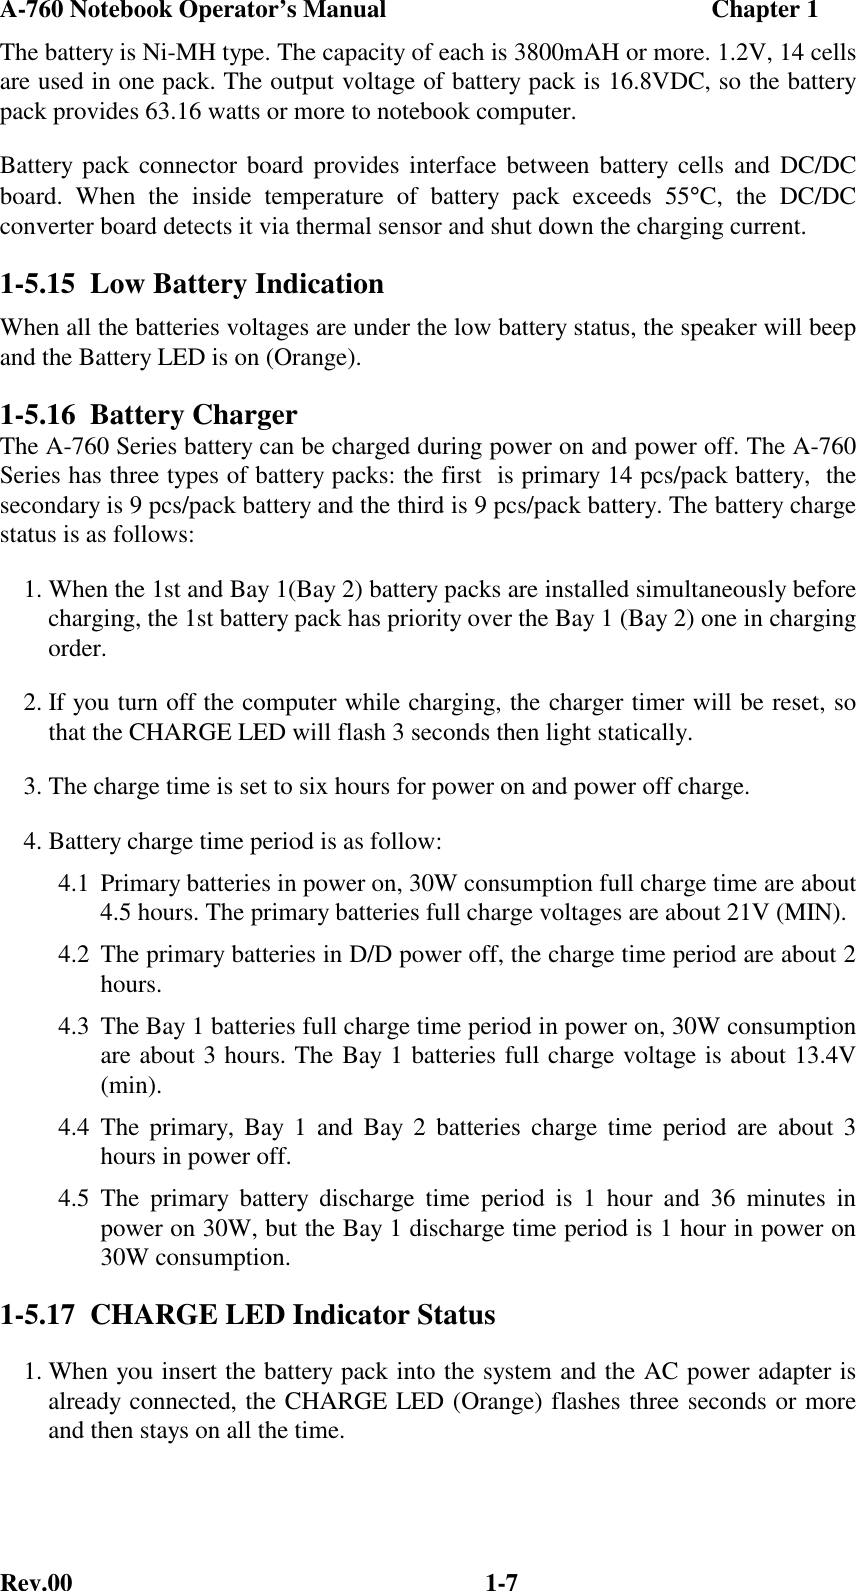 A-760 Notebook Operator’s Manual                                                    Chapter 1Rev.00 1-7The battery is Ni-MH type. The capacity of each is 3800mAH or more. 1.2V, 14 cellsare used in one pack. The output voltage of battery pack is 16.8VDC, so the batterypack provides 63.16 watts or more to notebook computer.Battery pack connector board provides interface between battery cells and DC/DCboard. When the inside temperature of battery pack exceeds 55°C, the DC/DCconverter board detects it via thermal sensor and shut down the charging current.1-5.15  Low Battery IndicationWhen all the batteries voltages are under the low battery status, the speaker will beepand the Battery LED is on (Orange).1-5.16  Battery ChargerThe A-760 Series battery can be charged during power on and power off. The A-760Series has three types of battery packs: the first  is primary 14 pcs/pack battery,  thesecondary is 9 pcs/pack battery and the third is 9 pcs/pack battery. The battery chargestatus is as follows:1. When the 1st and Bay 1(Bay 2) battery packs are installed simultaneously beforecharging, the 1st battery pack has priority over the Bay 1 (Bay 2) one in chargingorder.2. If you turn off the computer while charging, the charger timer will be reset, sothat the CHARGE LED will flash 3 seconds then light statically.3. The charge time is set to six hours for power on and power off charge.4. Battery charge time period is as follow:4.1 Primary batteries in power on, 30W consumption full charge time are about4.5 hours. The primary batteries full charge voltages are about 21V (MIN).4.2 The primary batteries in D/D power off, the charge time period are about 2hours.4.3 The Bay 1 batteries full charge time period in power on, 30W consumptionare about 3 hours. The Bay 1 batteries full charge voltage is about 13.4V(min).4.4 The primary, Bay 1 and Bay 2 batteries charge time period are about 3hours in power off.4.5 The primary battery discharge time period is 1 hour and 36 minutes inpower on 30W, but the Bay 1 discharge time period is 1 hour in power on30W consumption.1-5.17  CHARGE LED Indicator Status1. When you insert the battery pack into the system and the AC power adapter isalready connected, the CHARGE LED (Orange) flashes three seconds or moreand then stays on all the time.